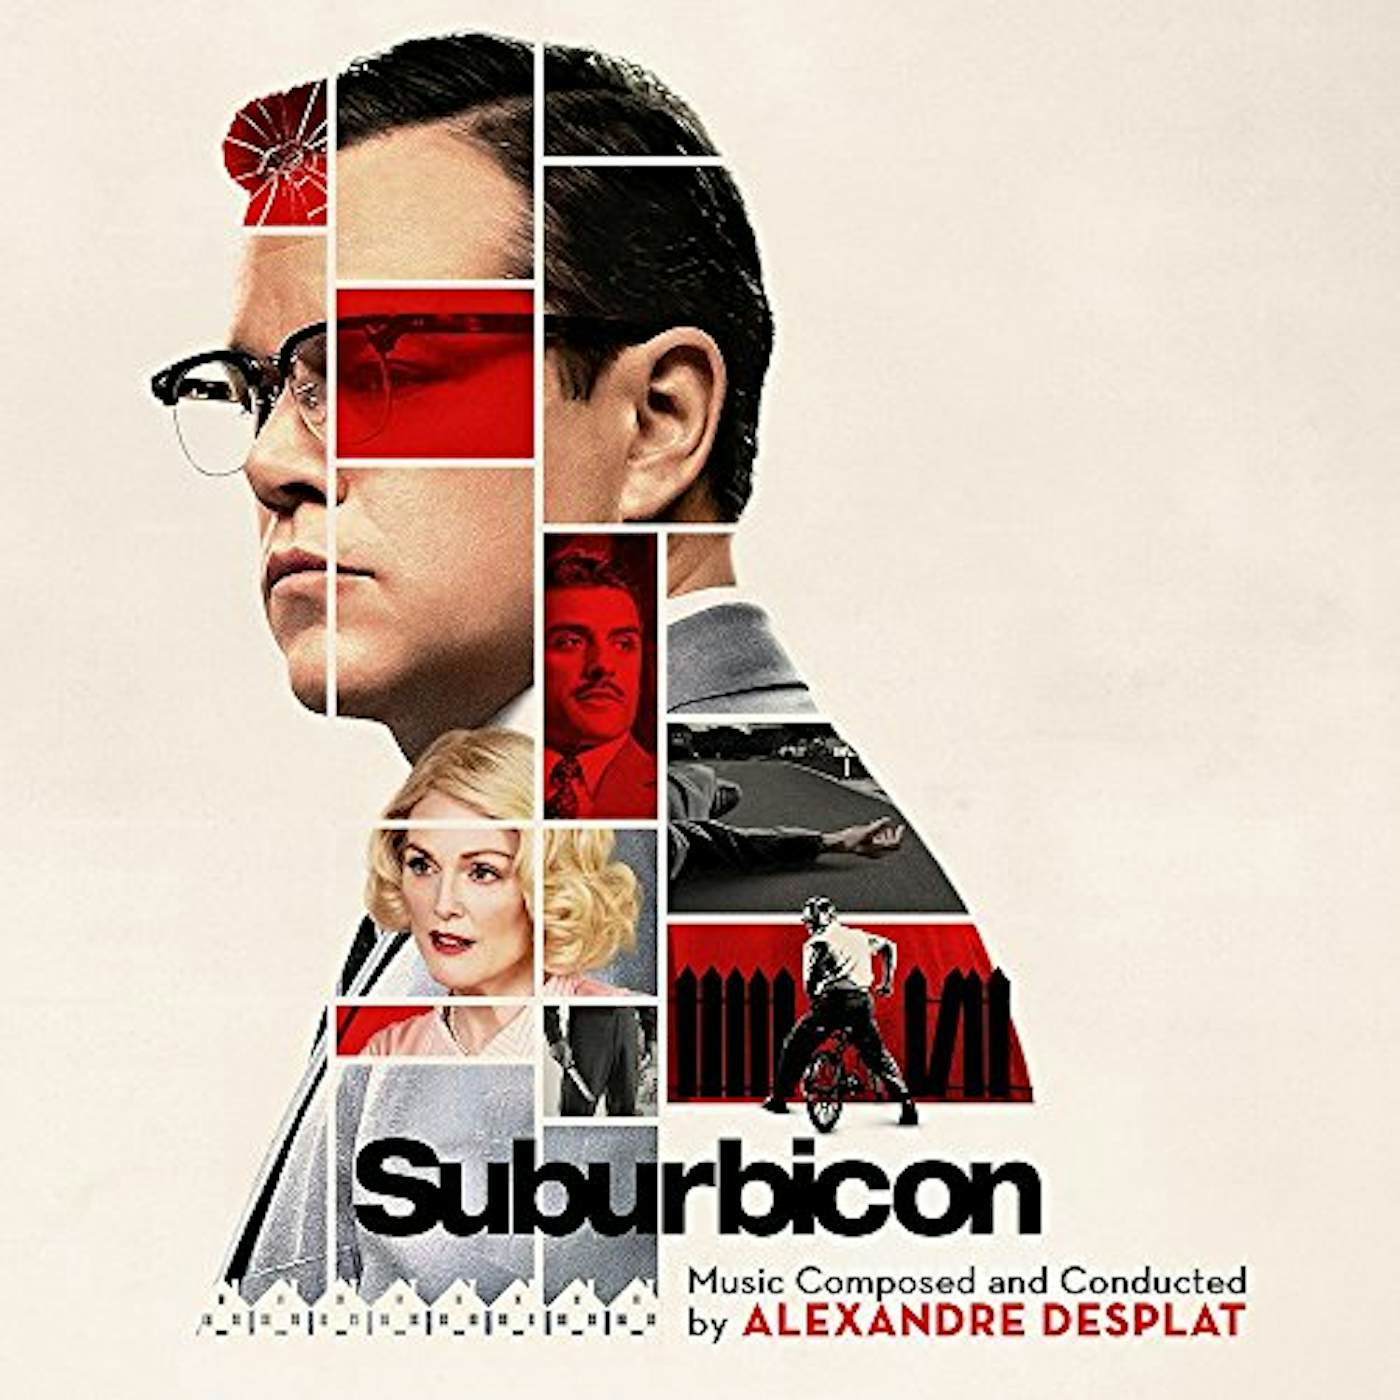 Alexandre Desplat SUBURBICON: MUSIC COMPOSED & CONDUCTED BY CD